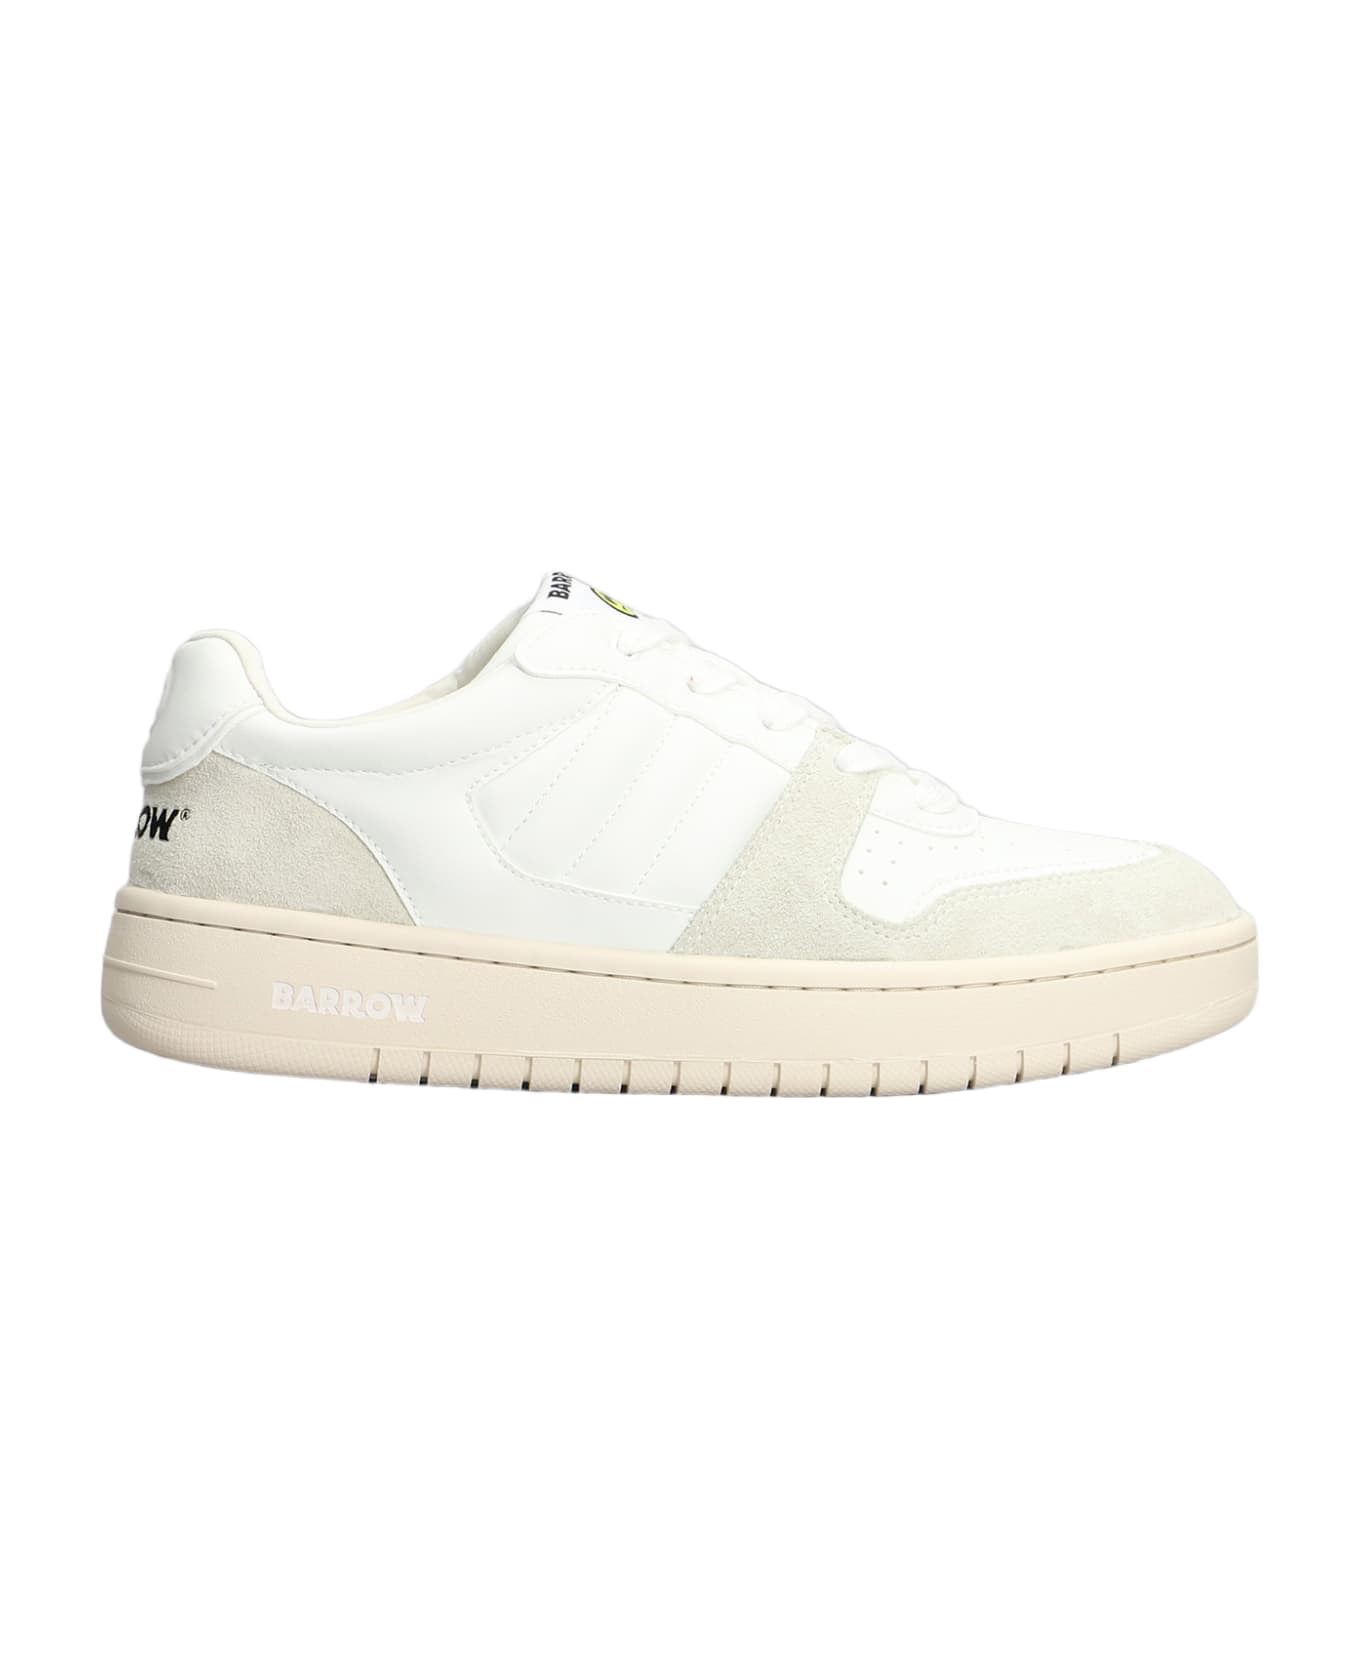 Barrow Sneakers In White Suede And Leather - white スニーカー